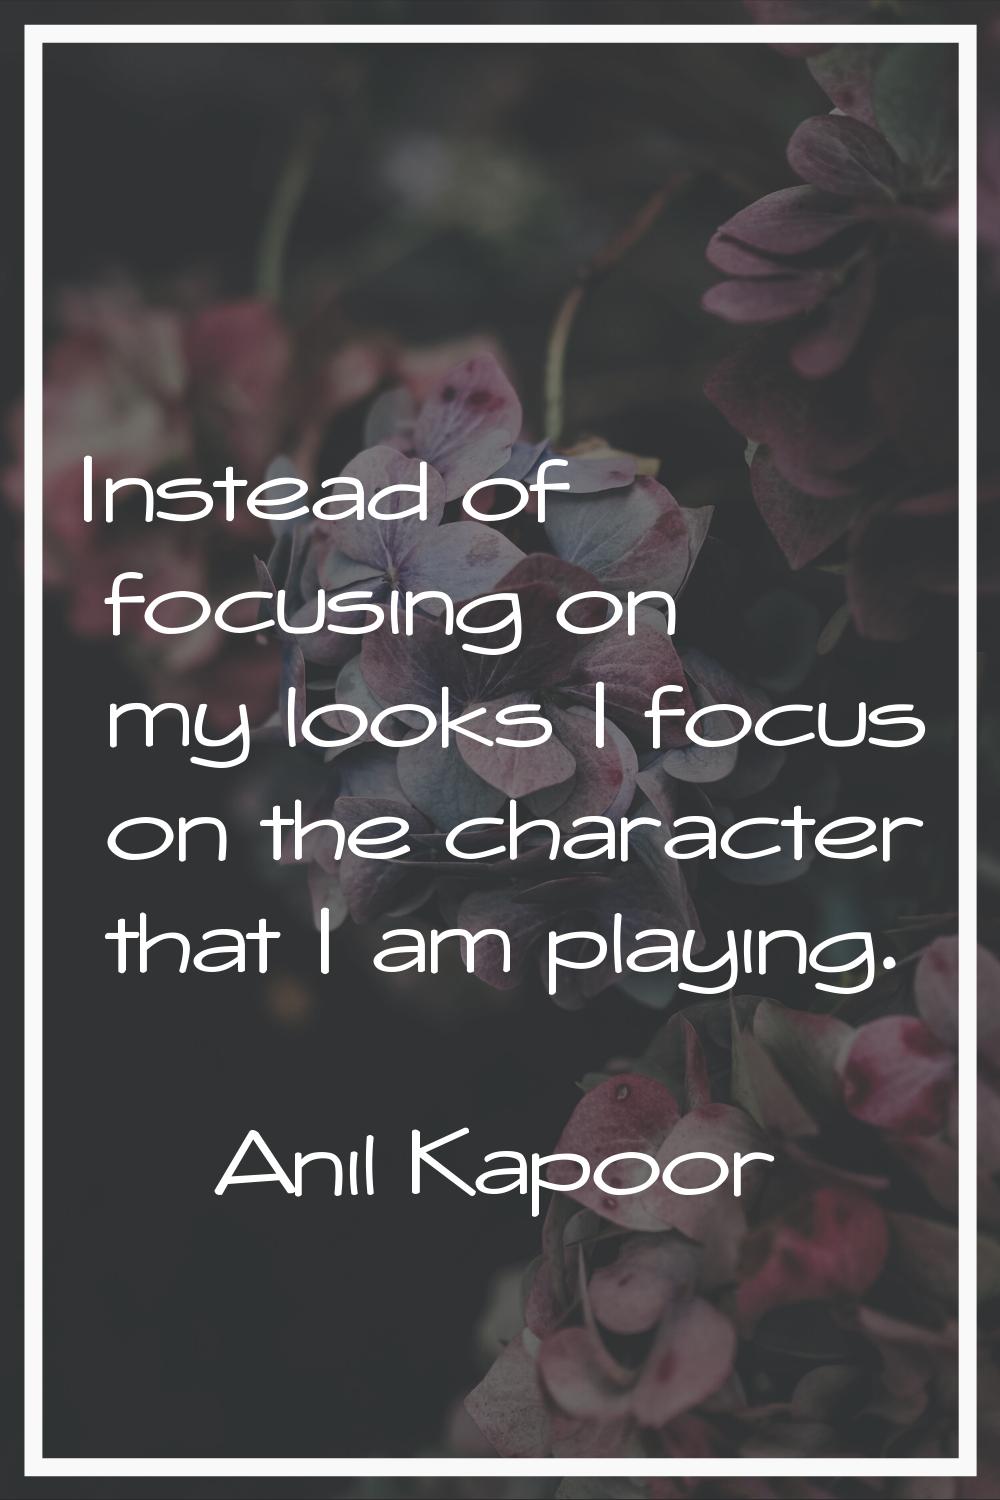 Instead of focusing on my looks I focus on the character that I am playing.